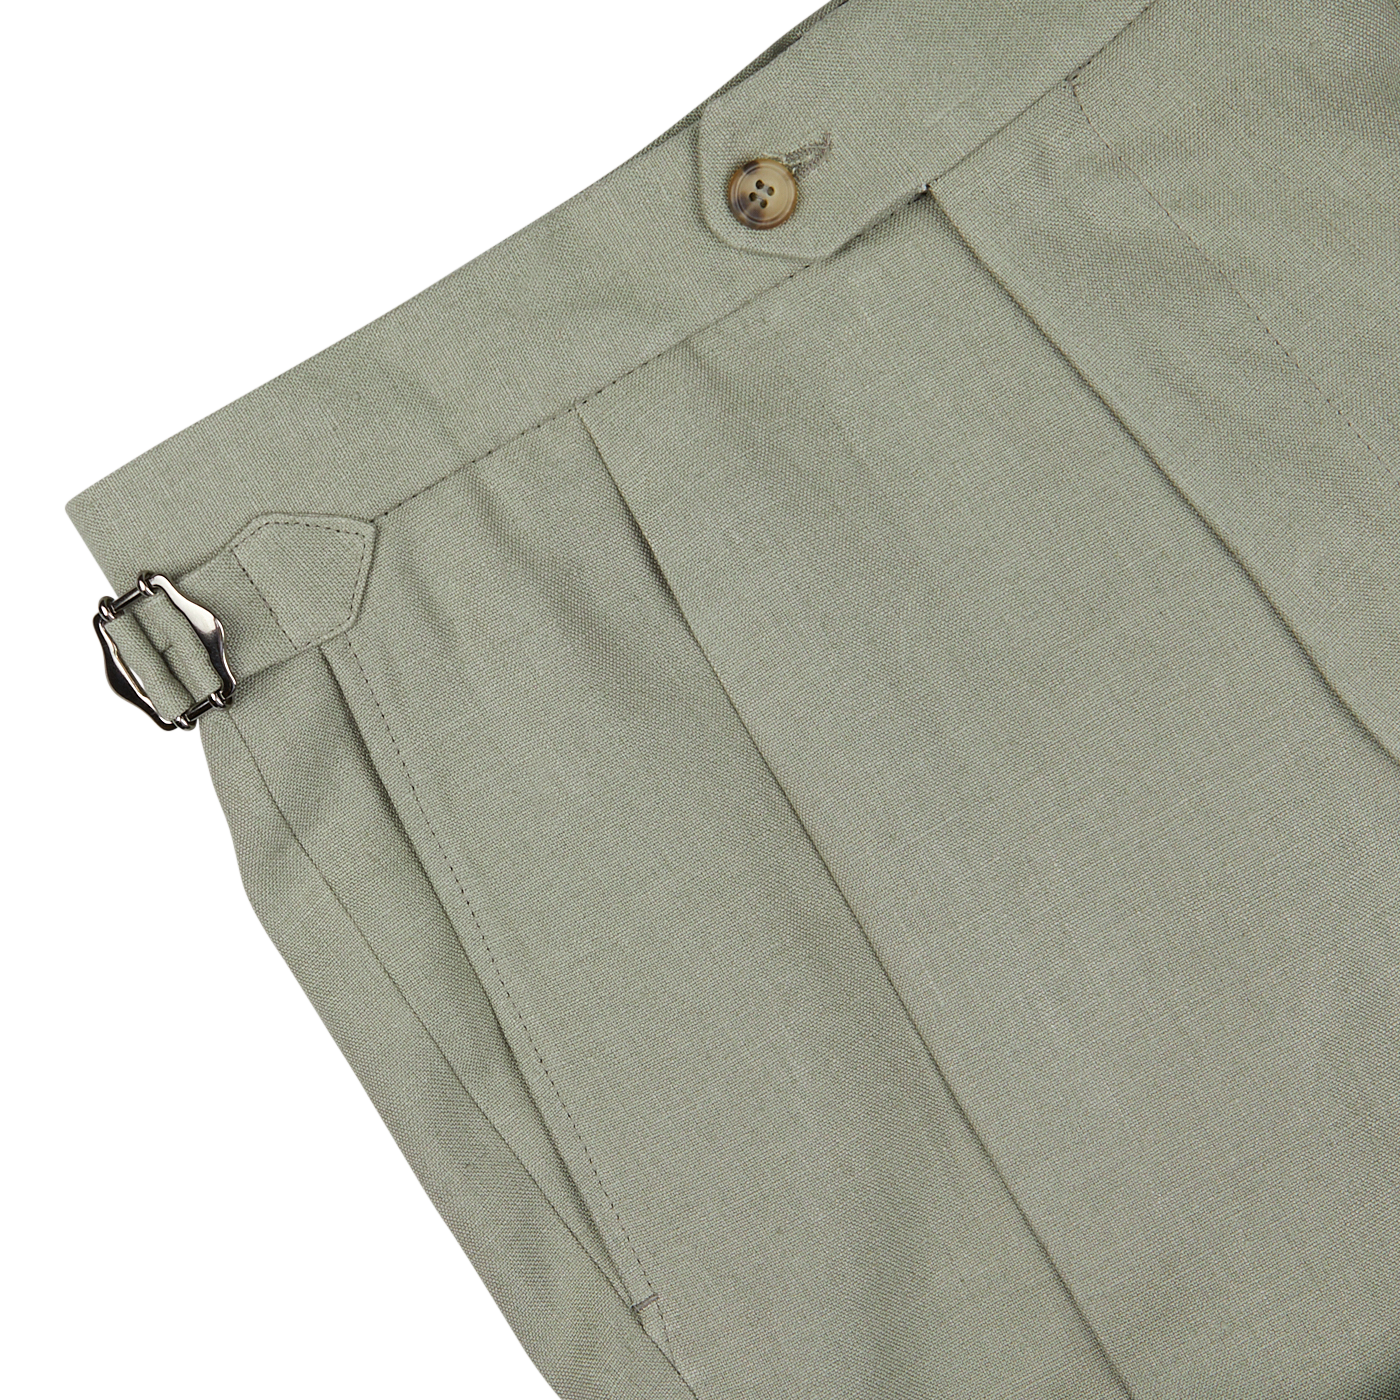 Close-up of light gray pants from a Sage Green Canapa Hemp DB Suit by Studio 73, featuring a side adjuster and a brown button at the waist. The fabric appears to be light and finely textured, with pleats near the waistband.